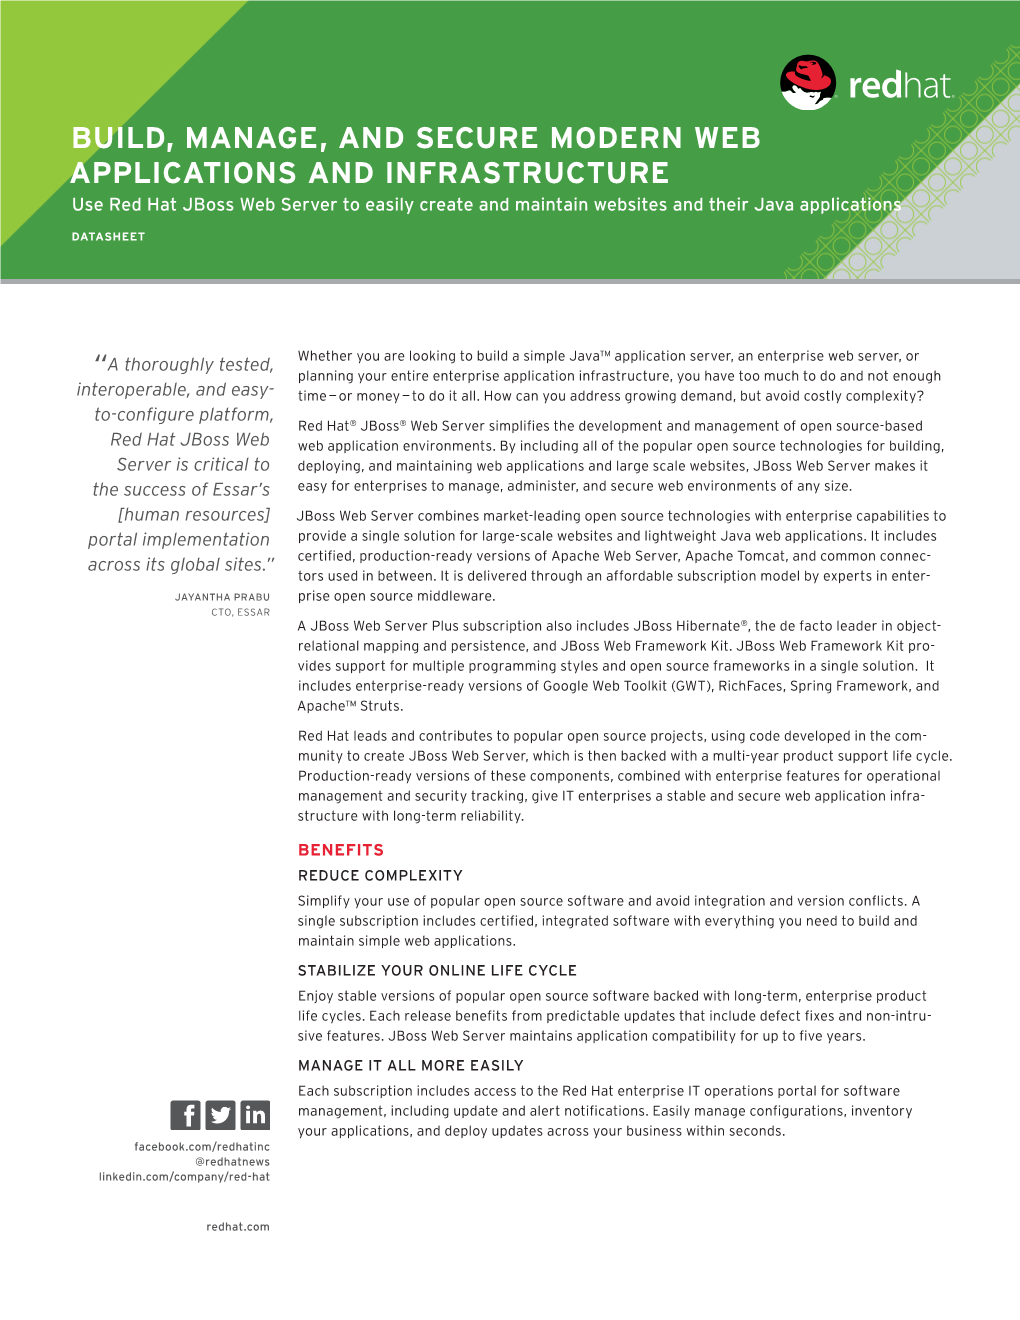 BUILD, MANAGE, and SECURE MODERN WEB APPLICATIONS and INFRASTRUCTURE Use Red Hat Jboss Web Server to Easily Create and Maintain Websites and Their Java Applications